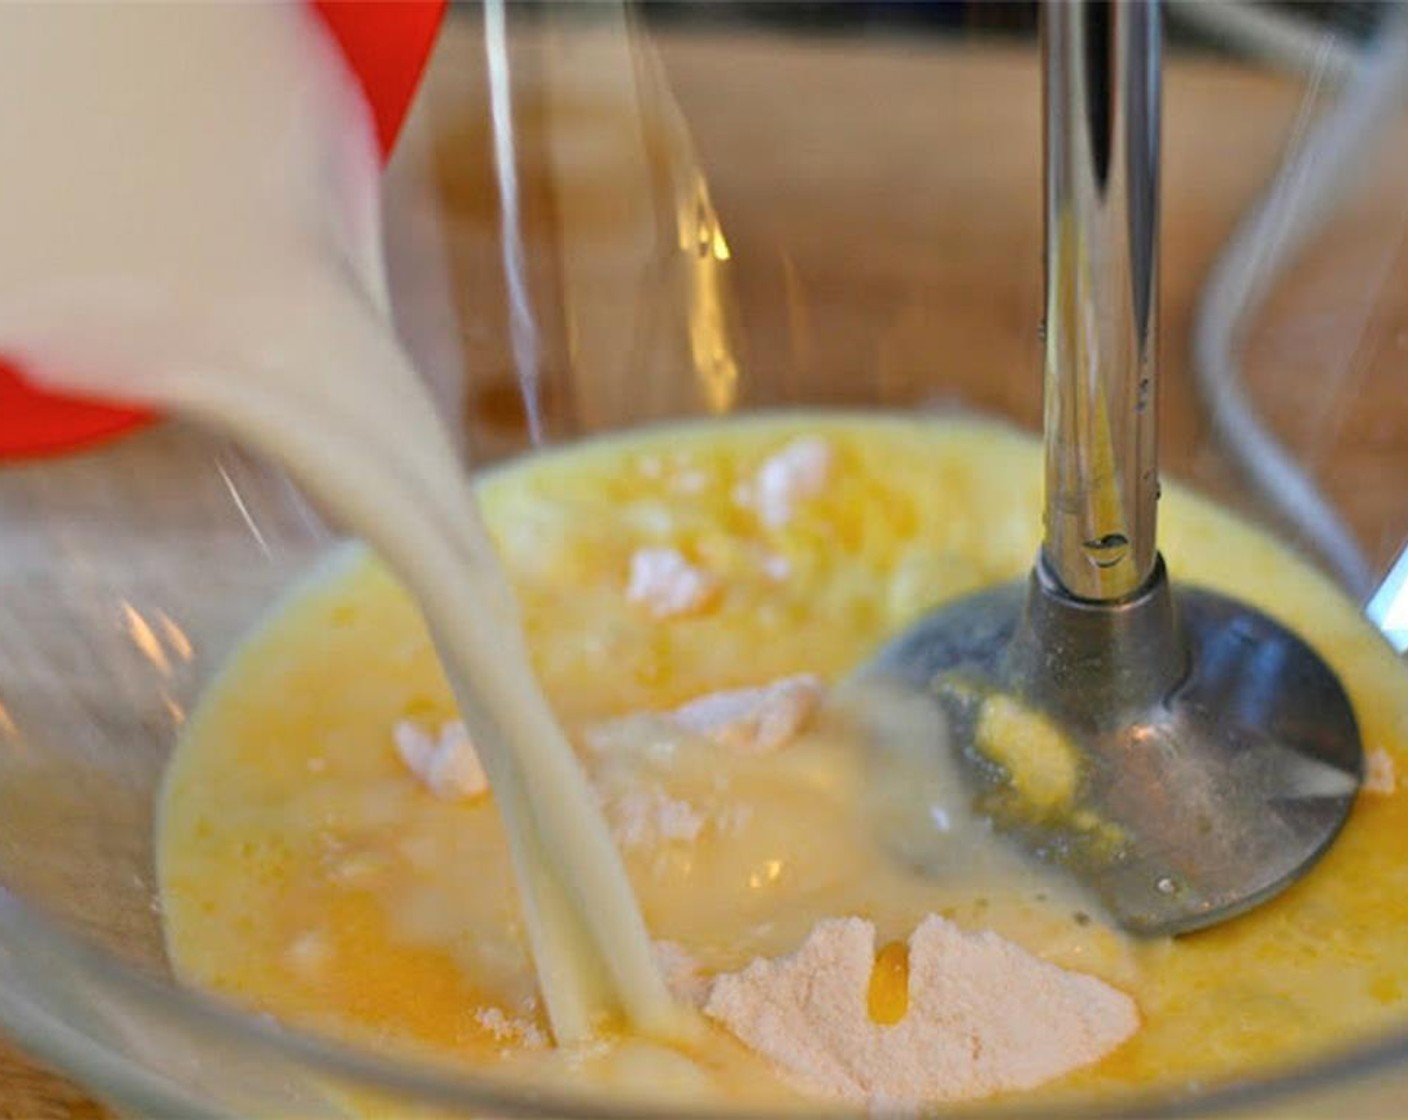 step 4 For the pudding, add Milk (3/4 cup) to Instant Vanilla Pudding (1 pckg). Beat for 2 minutes.